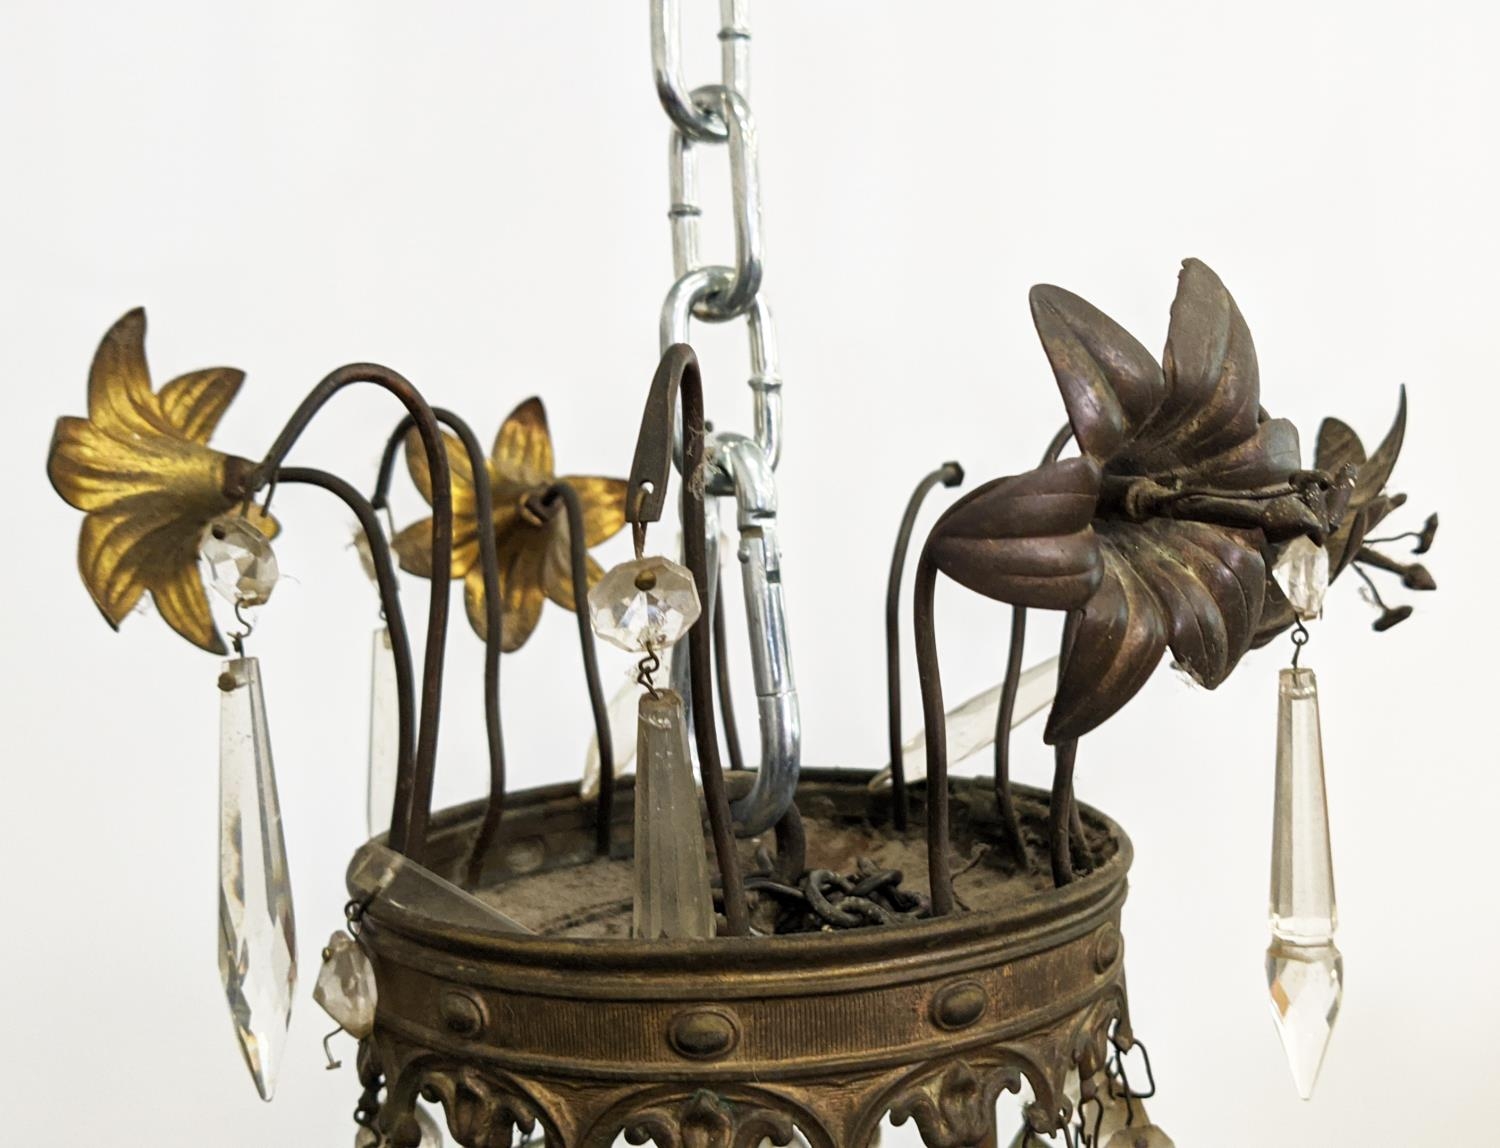 CHANDELIER, late 19th/early 20th century French, six branch, 100cm H approx. - Image 4 of 7